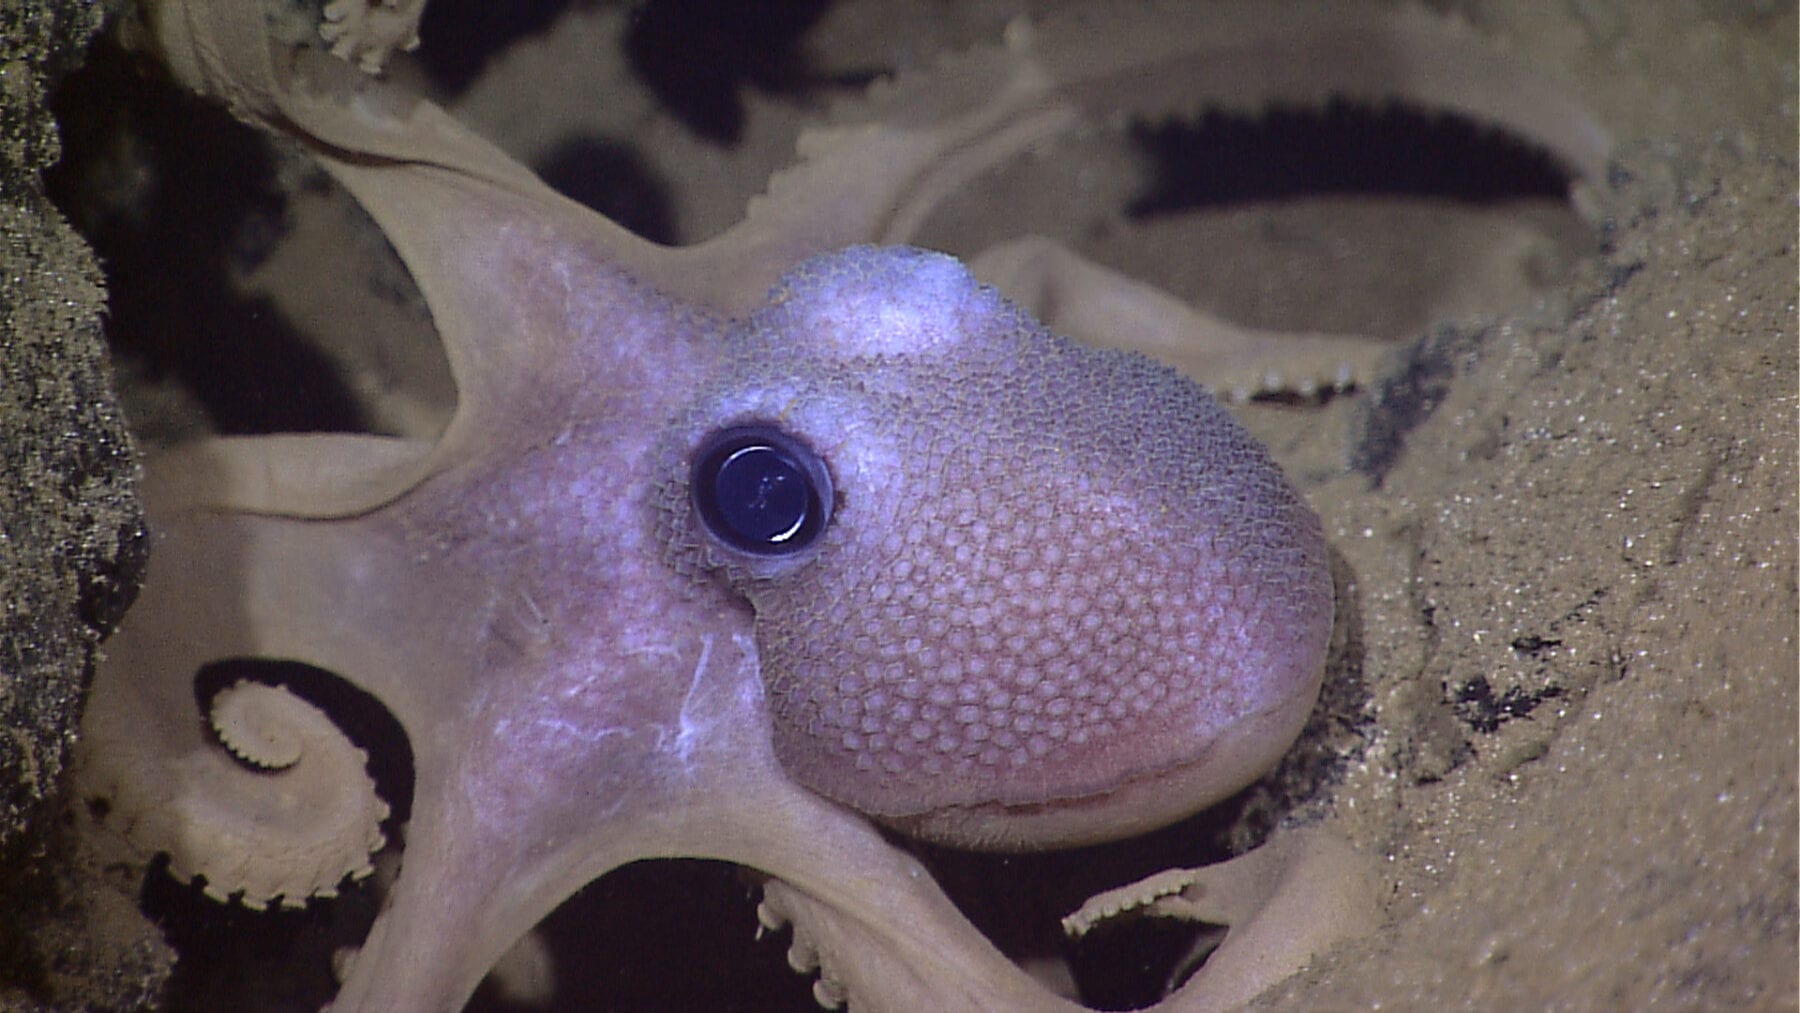 This octopus has color-changing cells, called chromatophores, in its skin, a phenomenon that inspired Rutgers engineers. Photo: NOAA Okeanos Explorer Program, Galapagos Rift Expedition 2011